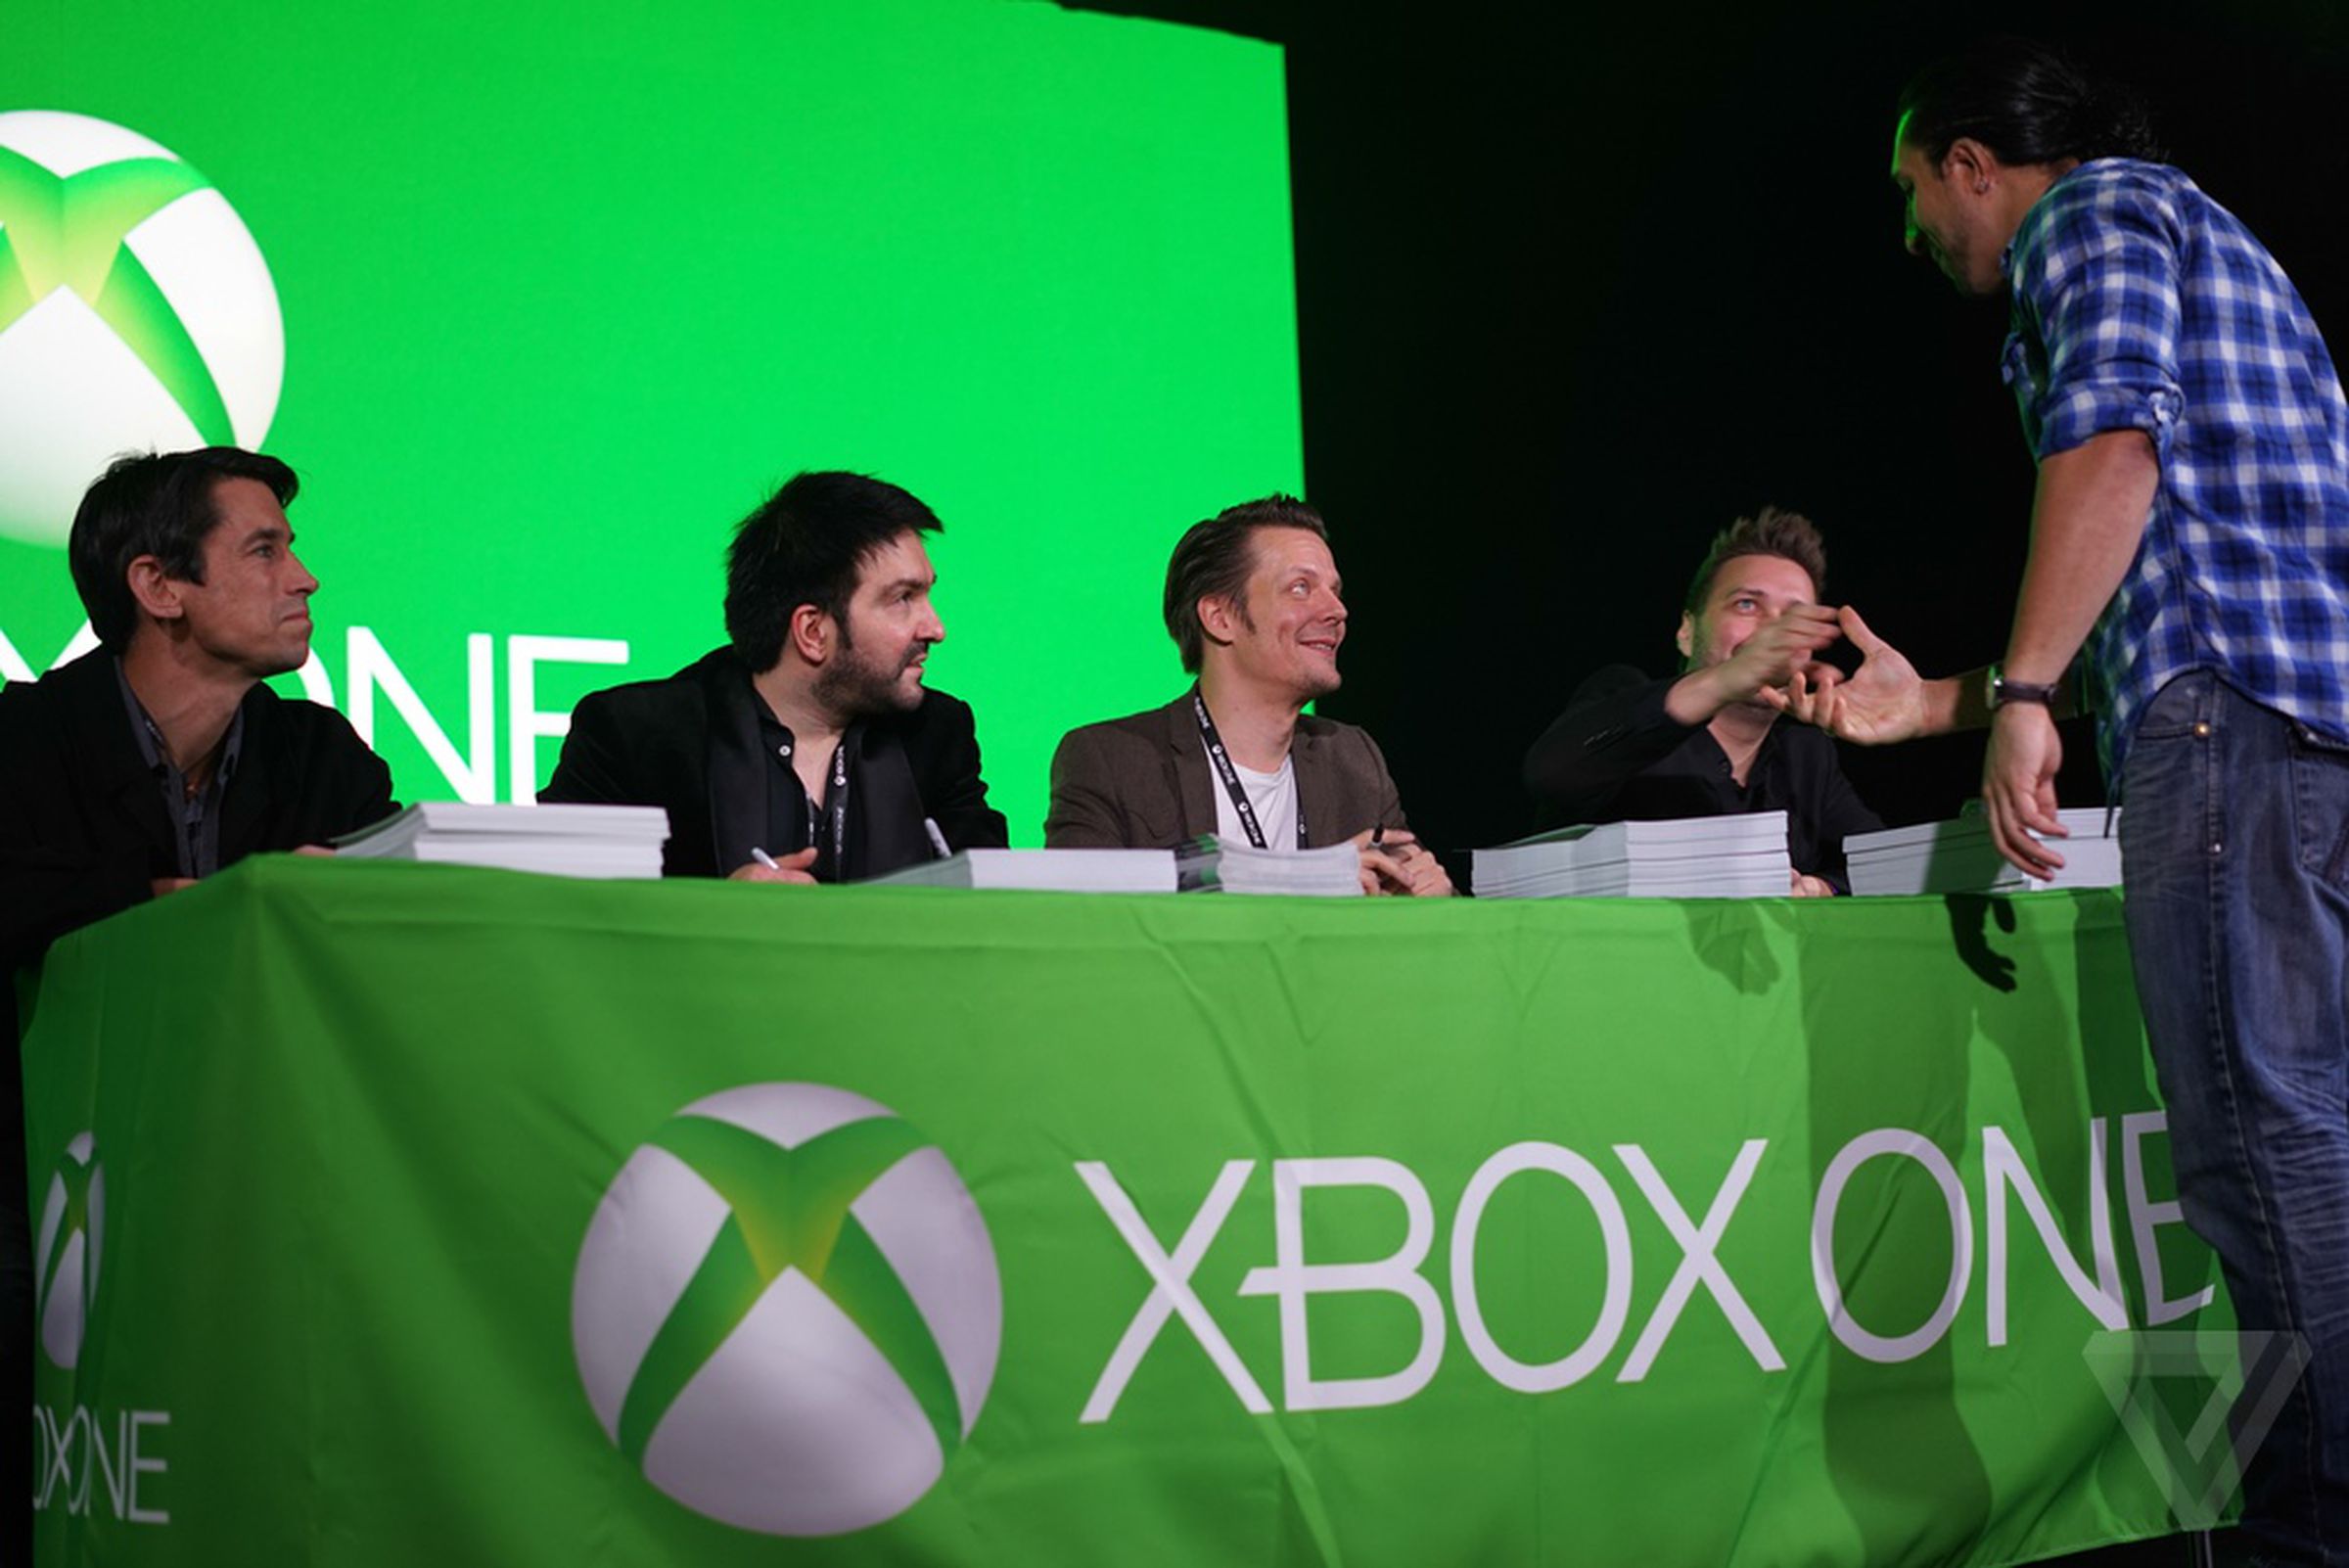 Xbox One launch party photos